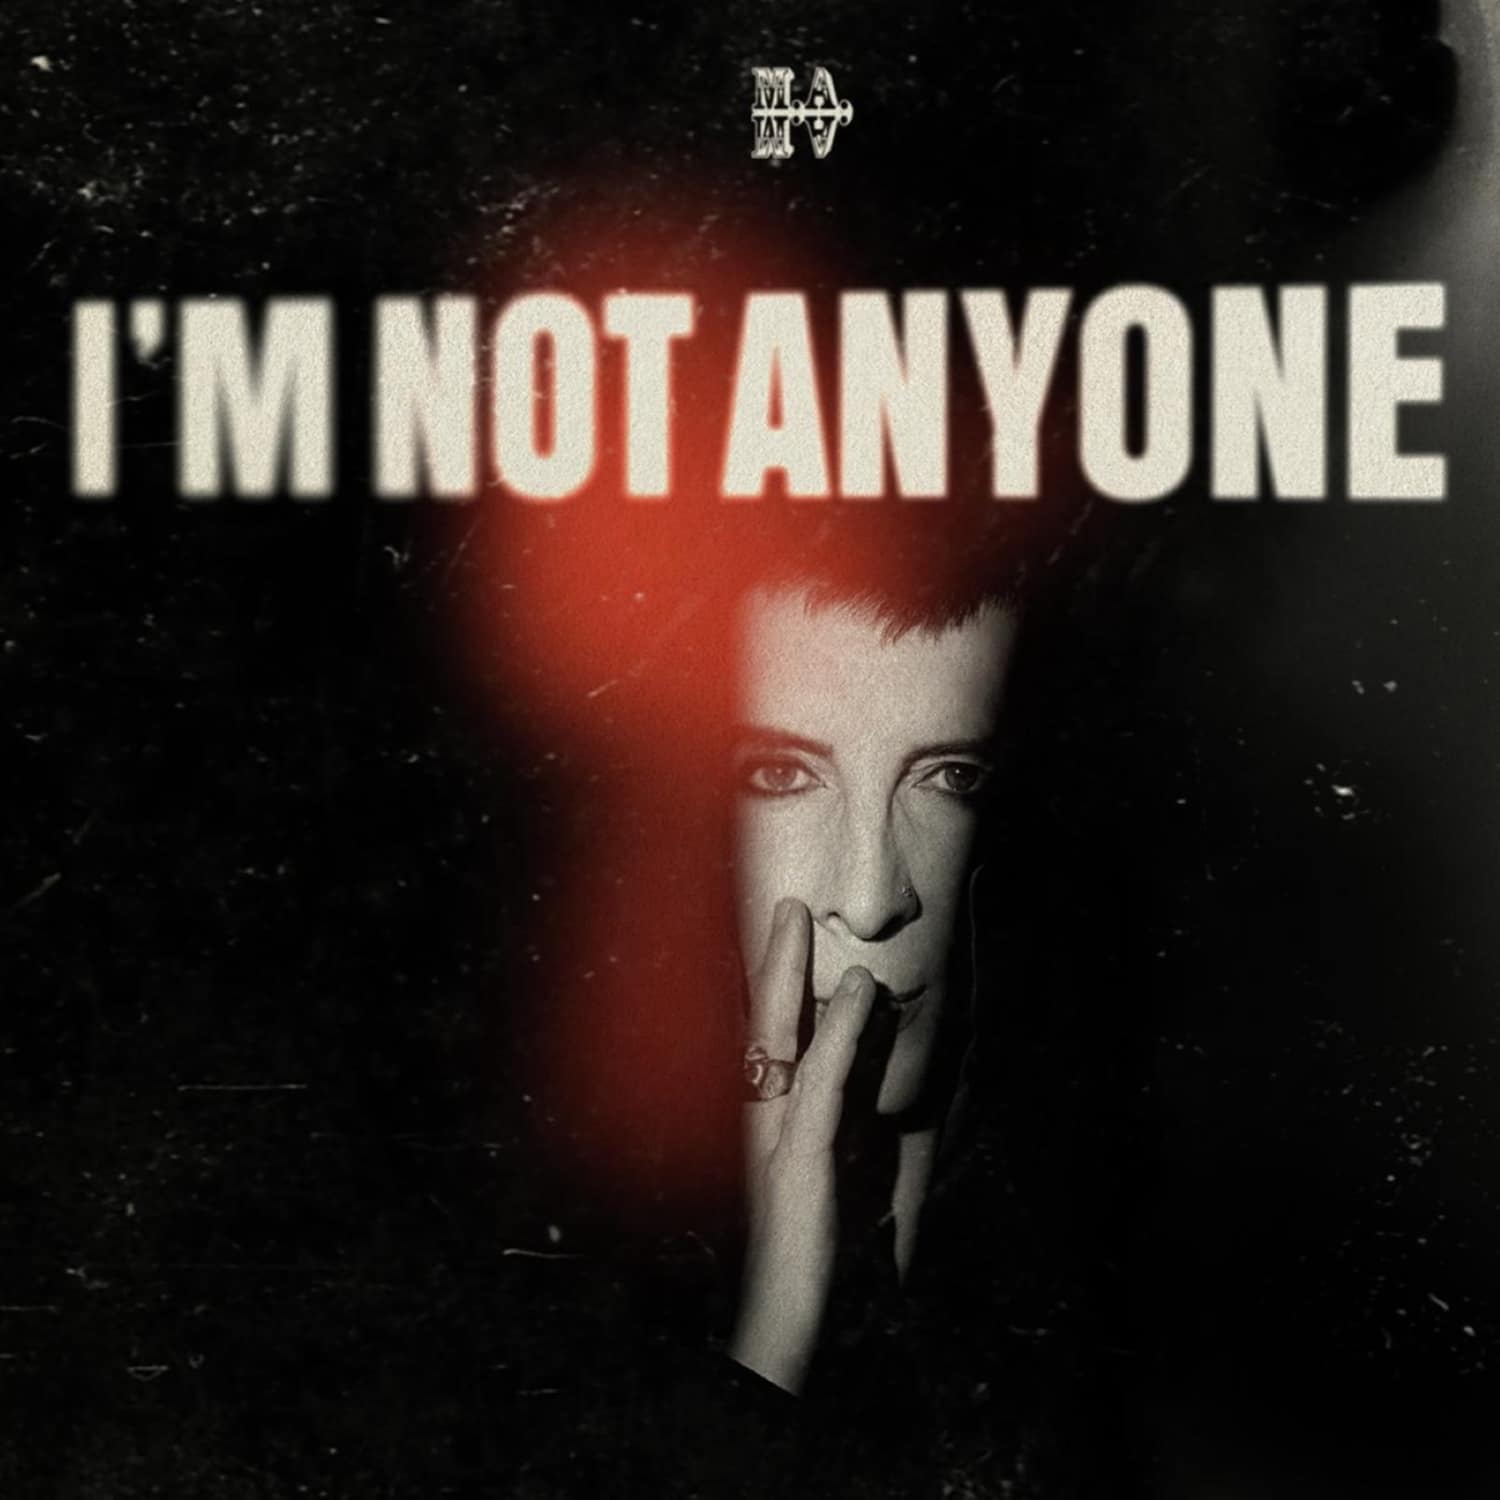 Marc Almond - I M NOT ANYONE 